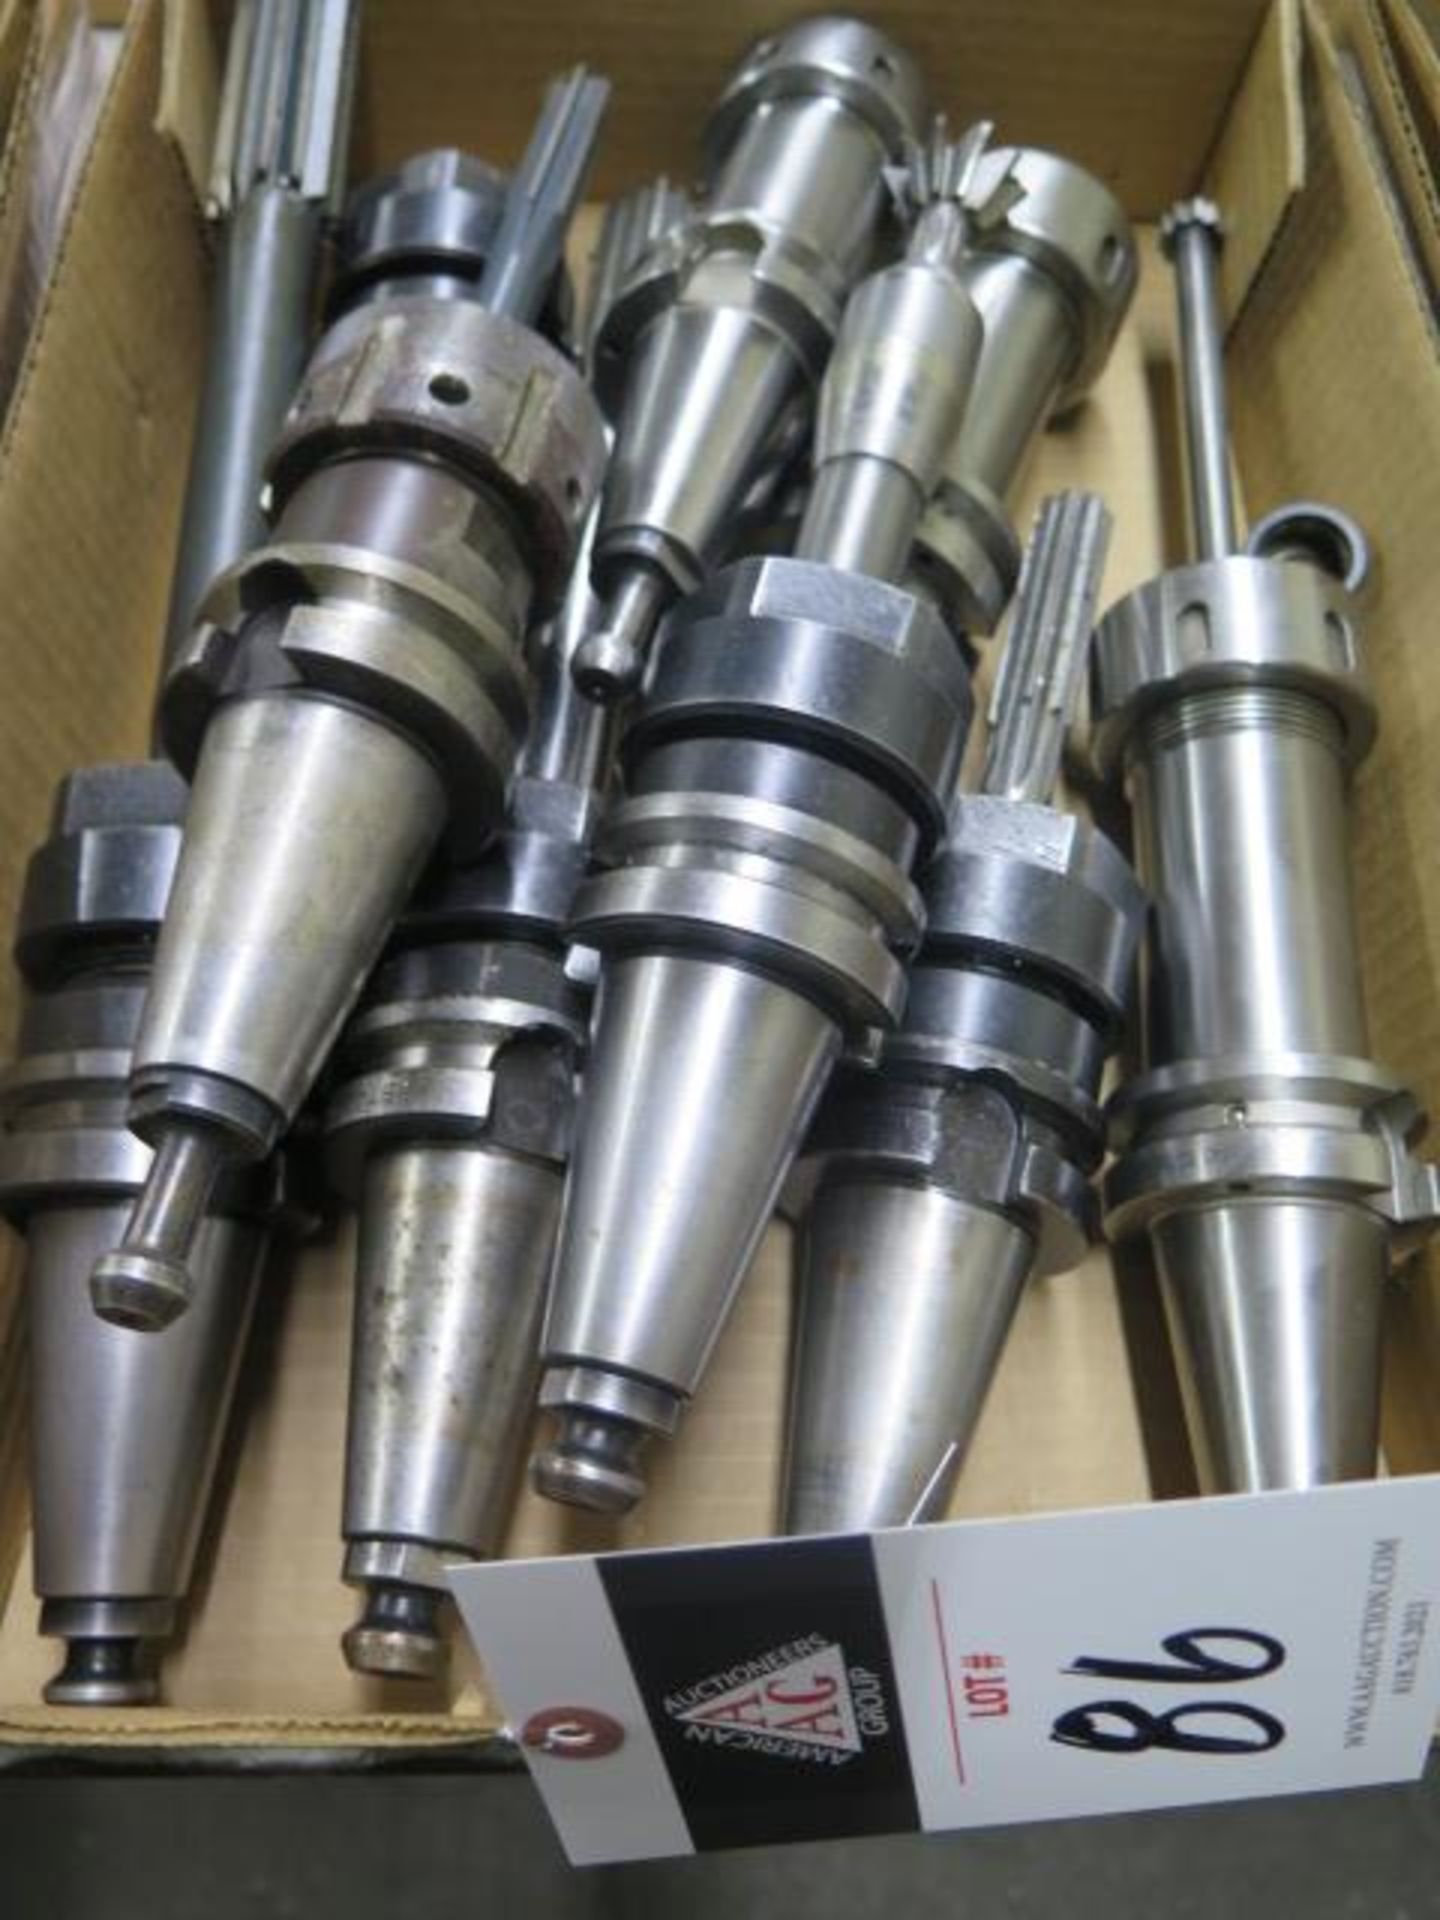 BT-40 Taper TG100 Collet Chucks (9) (SOLD AS-IS - NO WARRANTY)